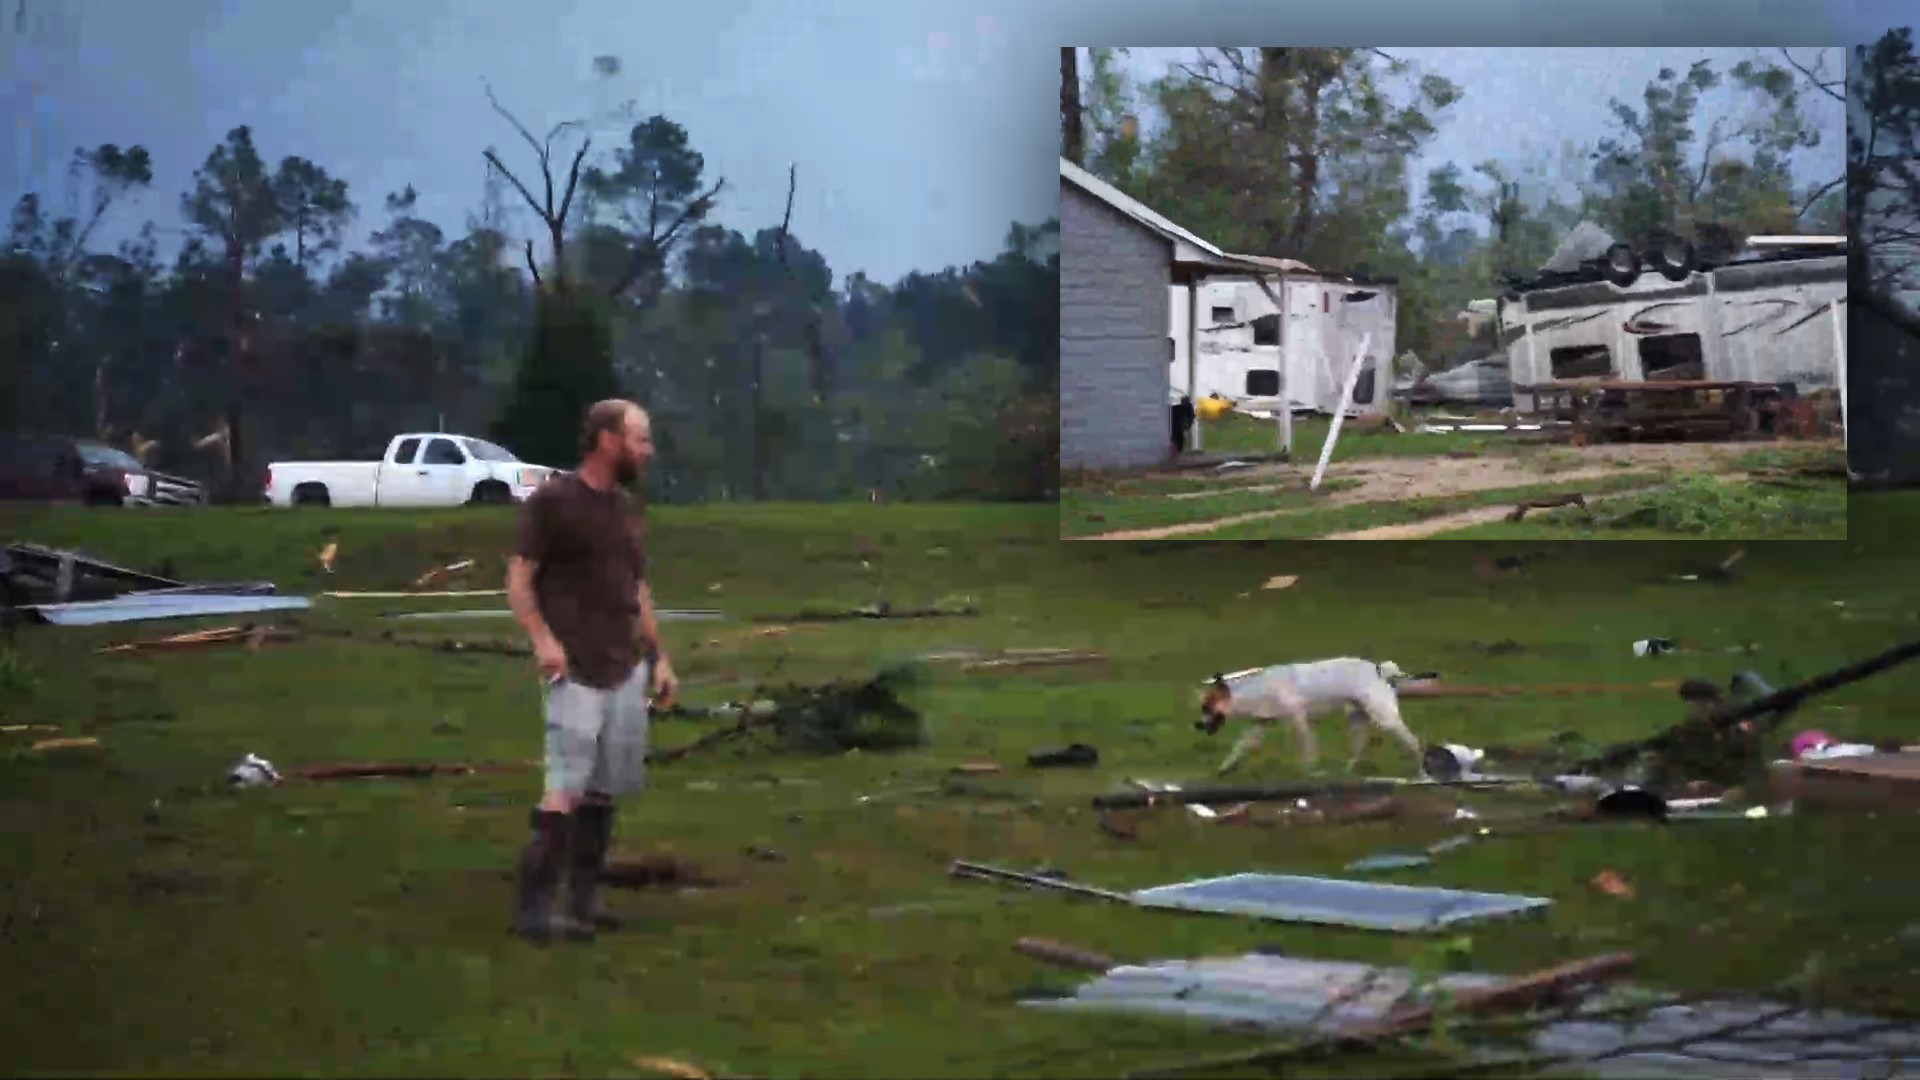 Pobla Gallier’s home was nearly destroyed in Wednesday’s tornado that ripped through Polk County, about 75 miles northeast of Houston.